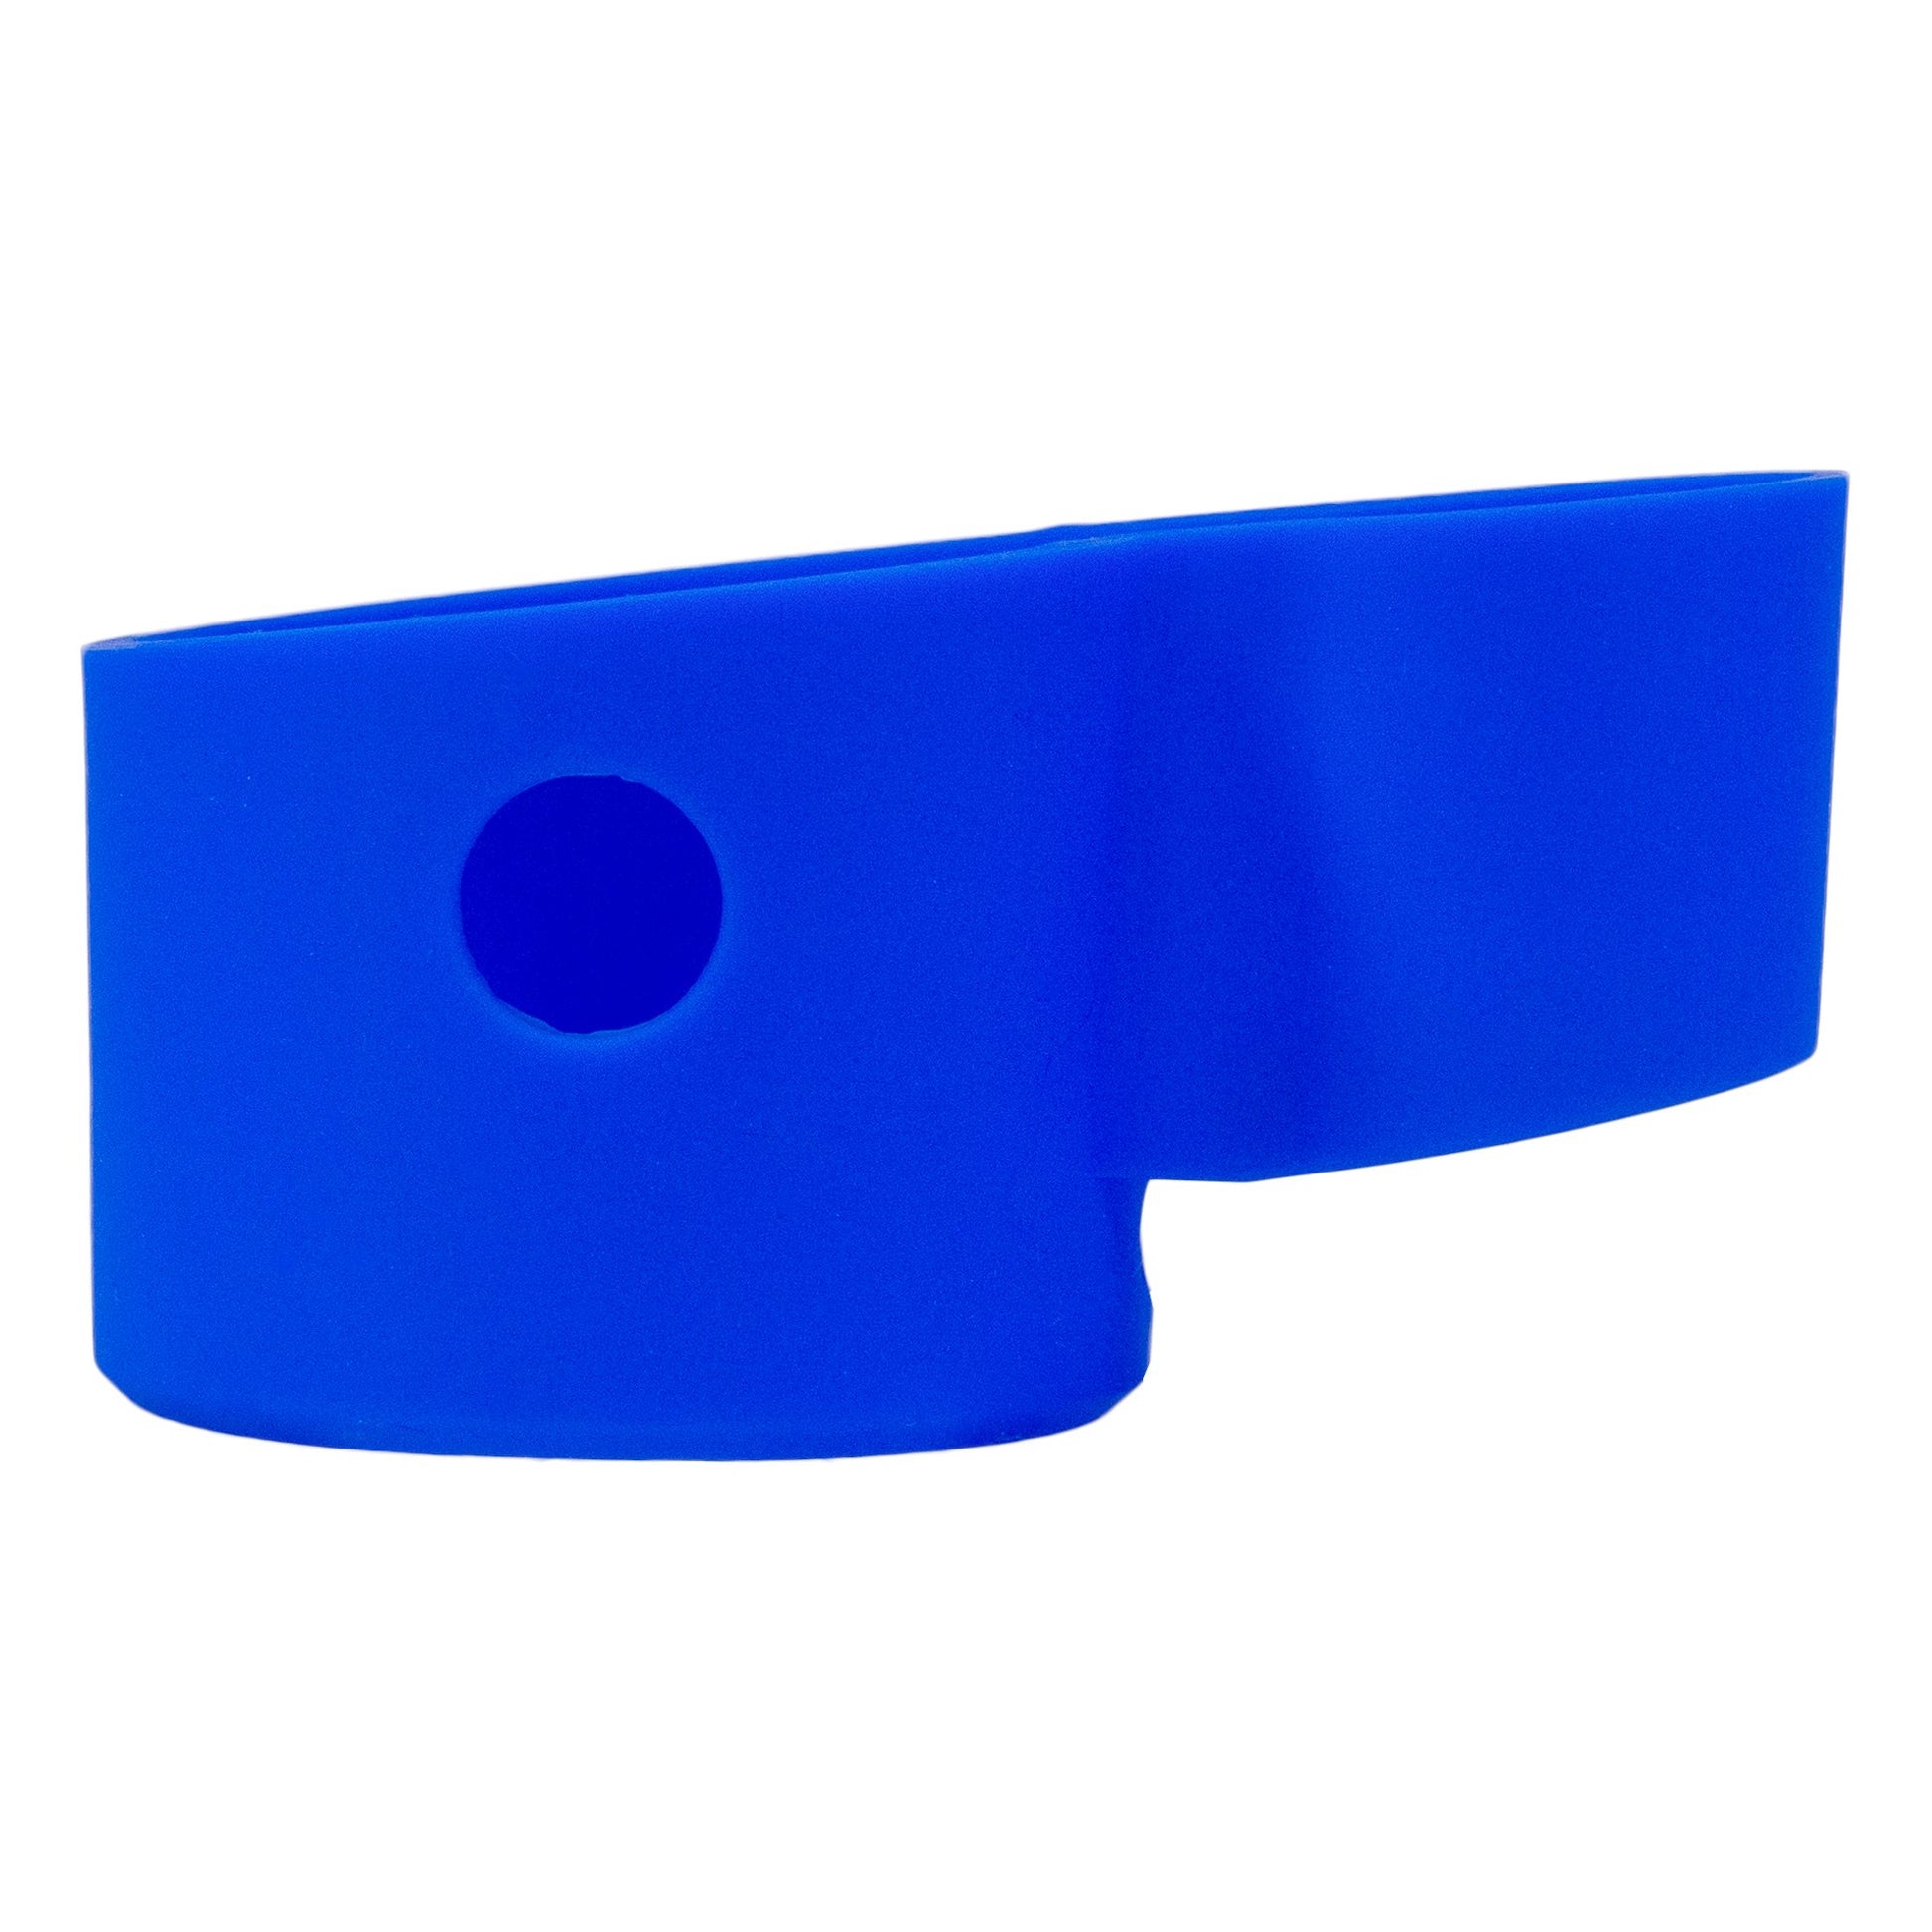 The CORE Silicone Sleeves Everything Else Shenzhen Crossing Blue 